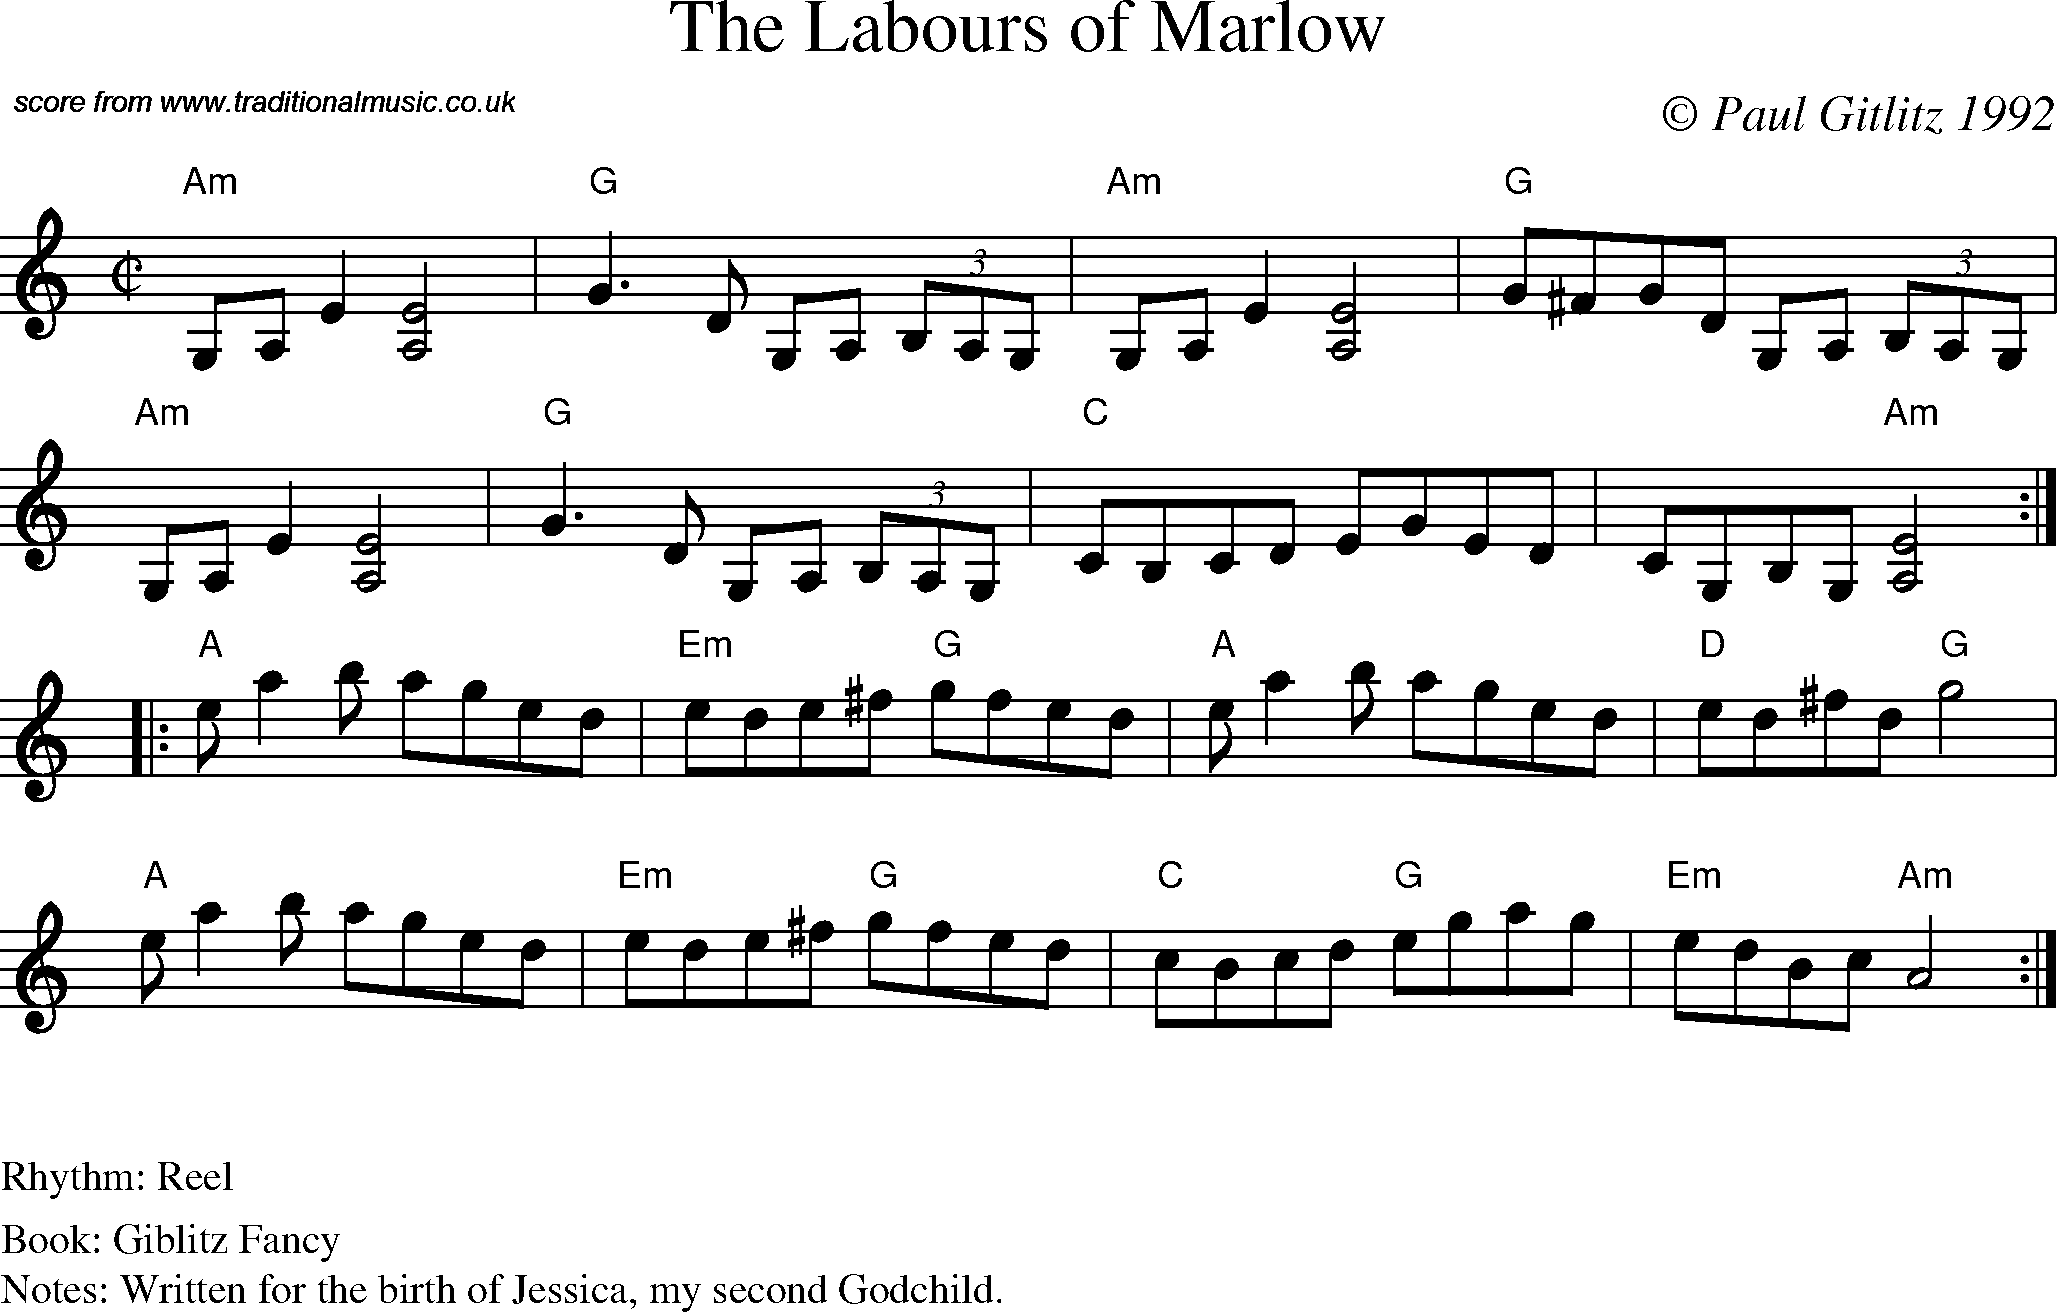 Sheet Music Score for Reel - The Labours of Marlow